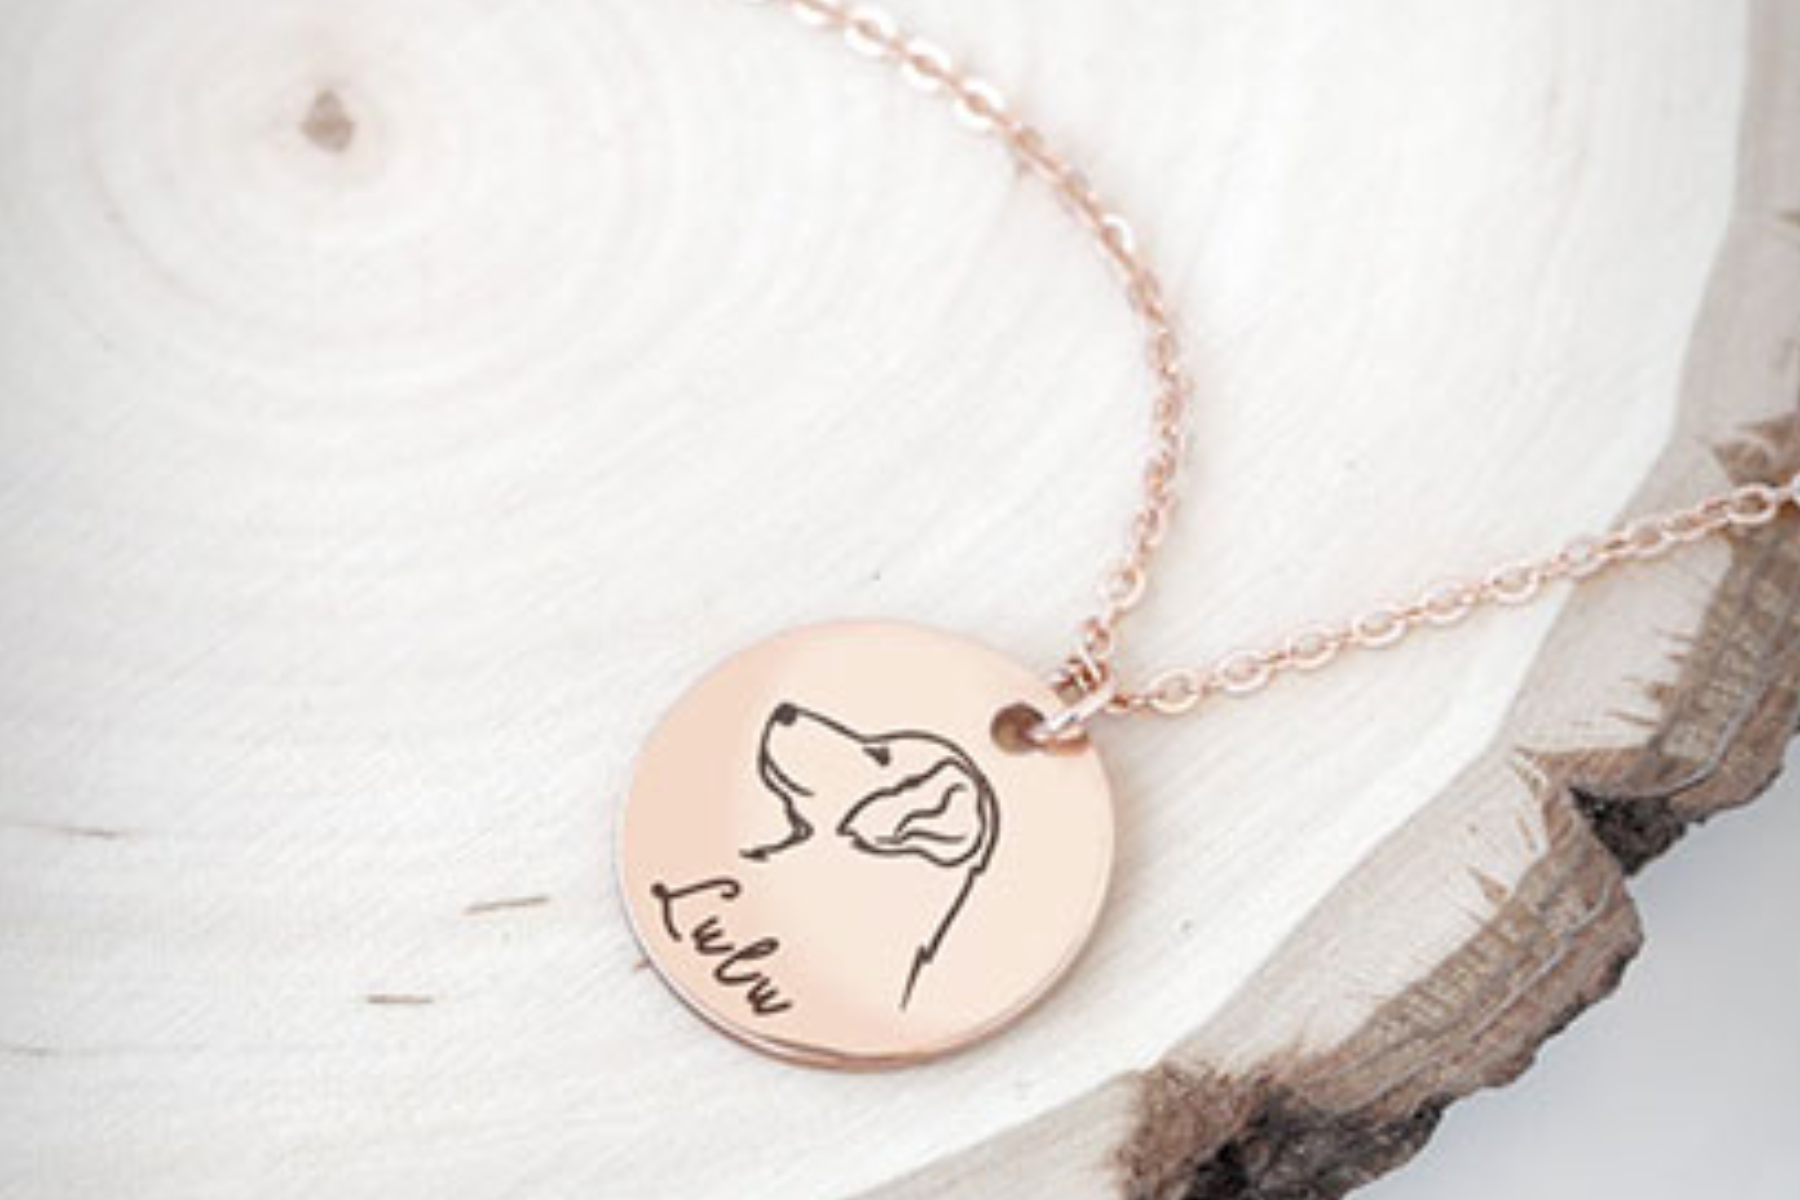 Custom Jewelry For Pet Owners - A Trending Way To Show Your Love For Your Pet